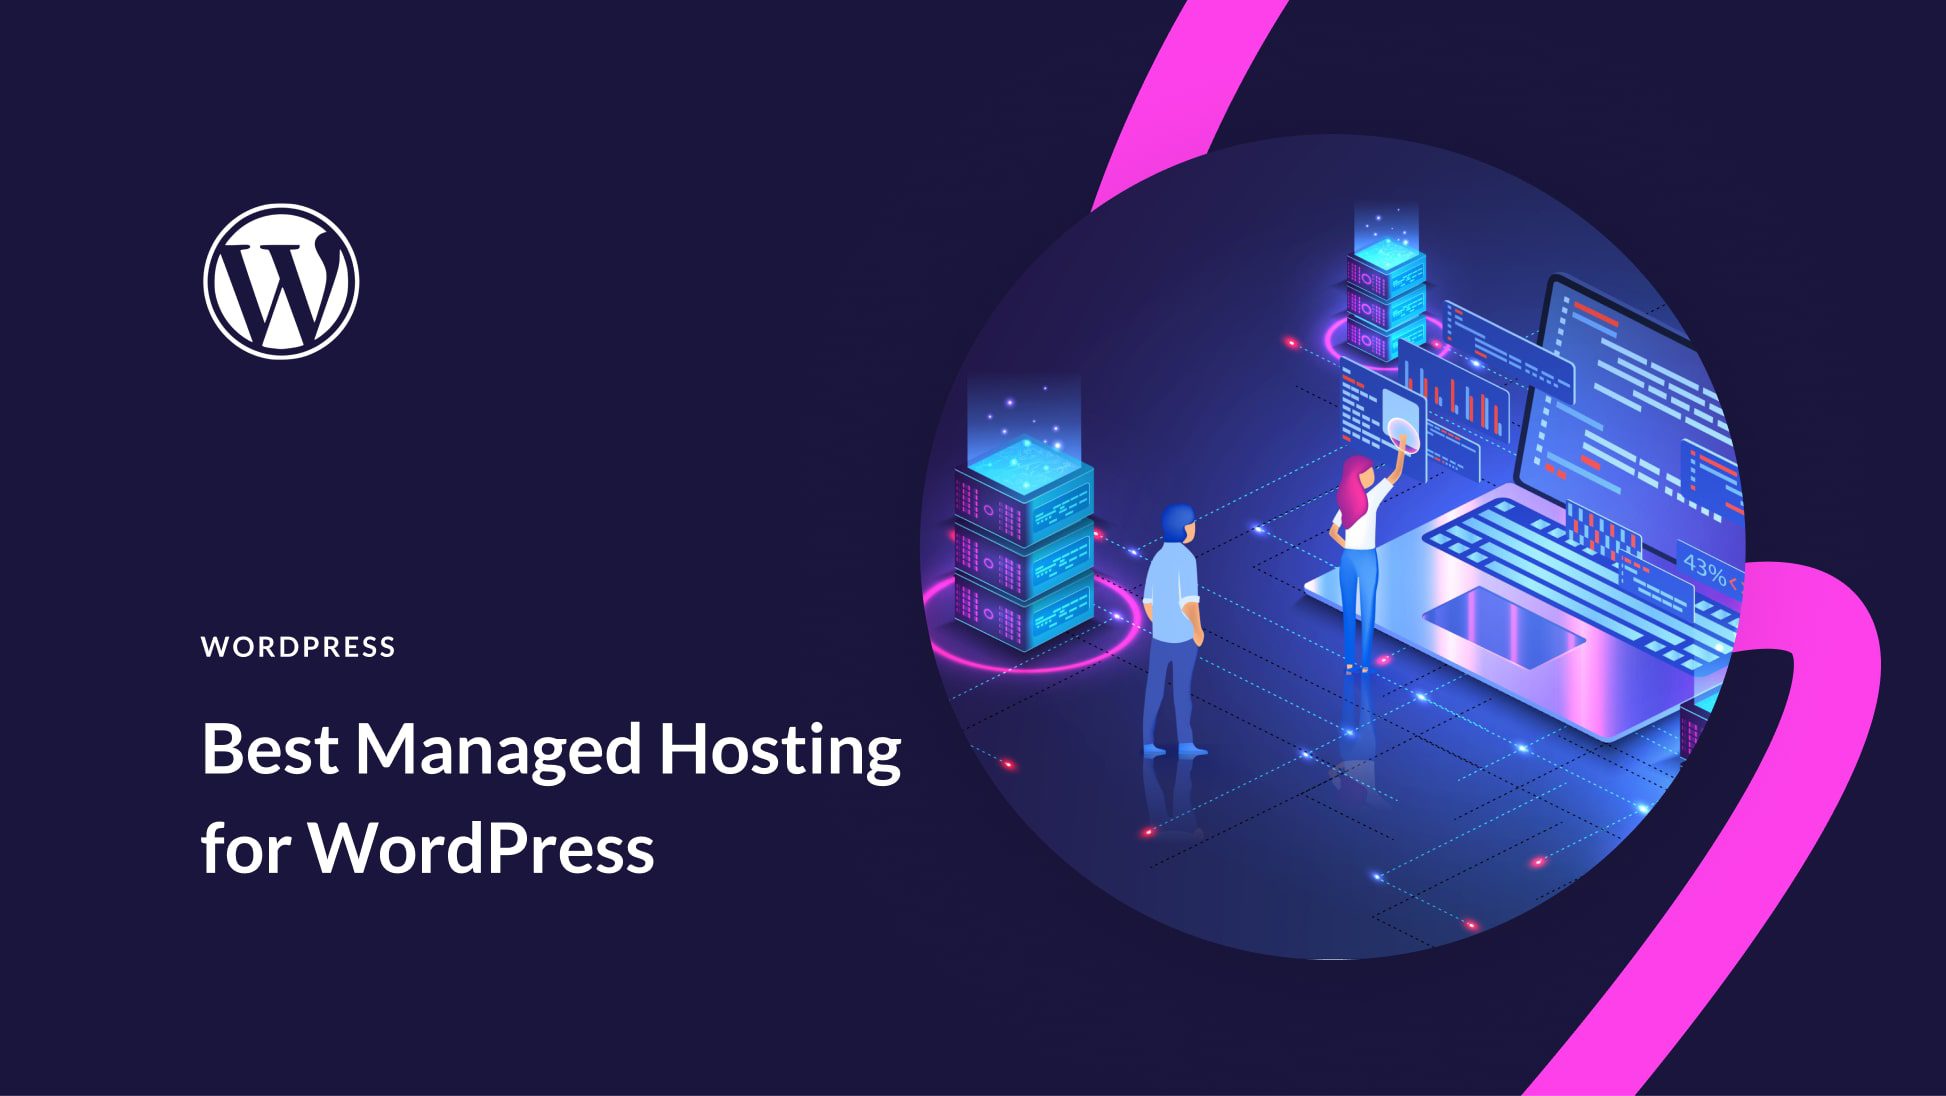 7 Best Managed WordPress Hosting Options in 2023 (Compared)